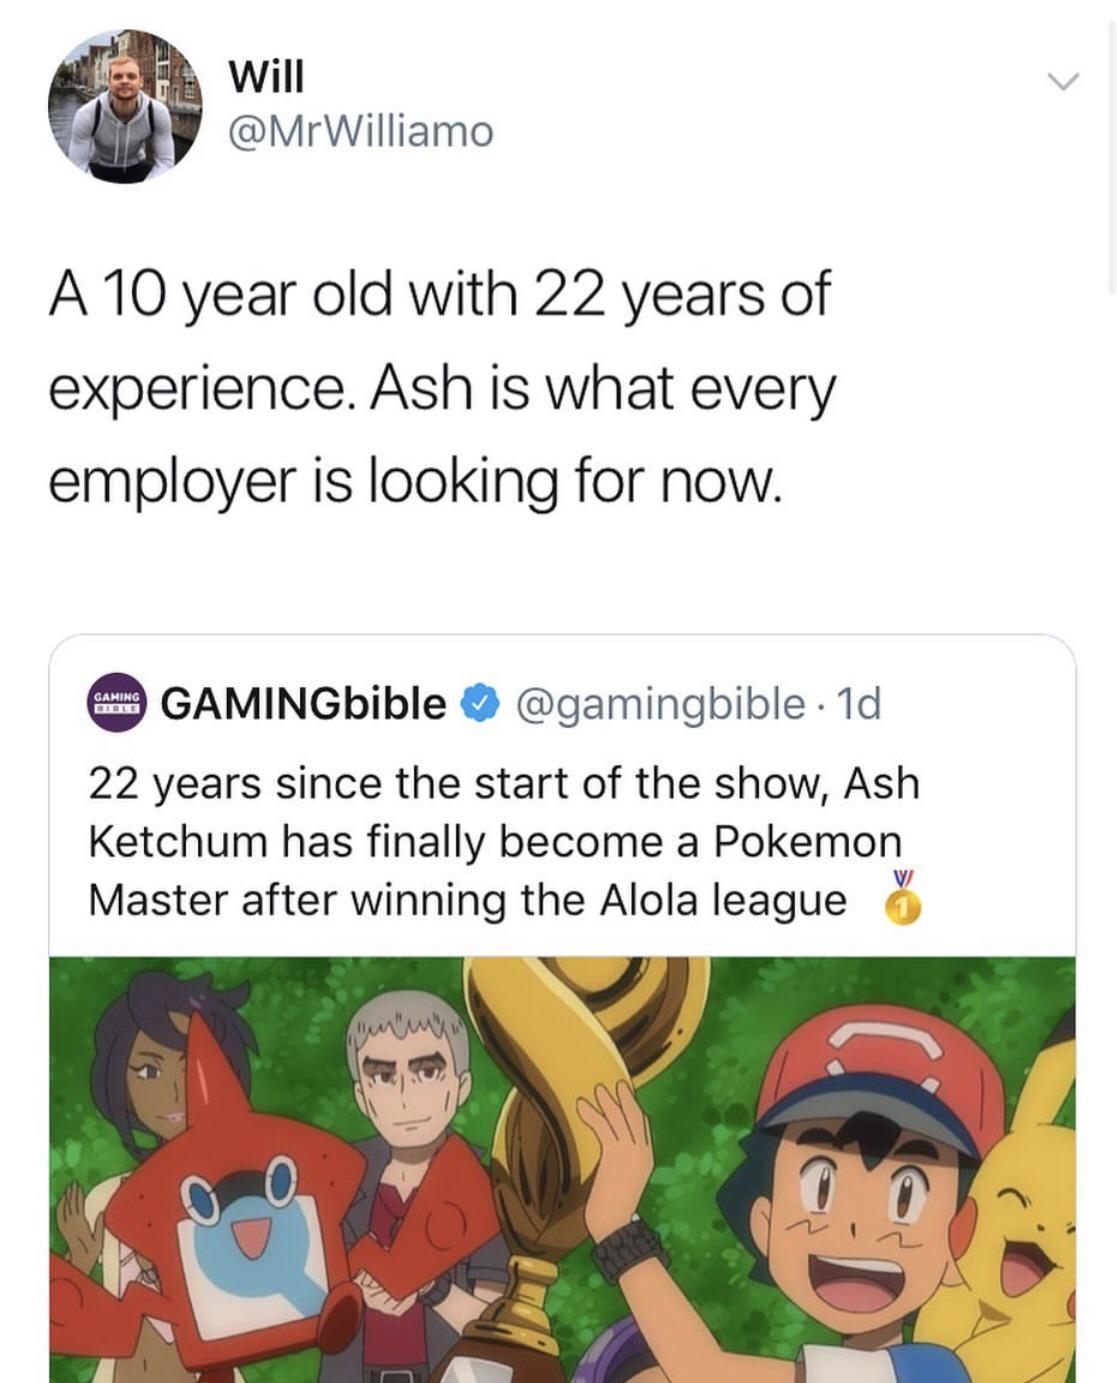 cartoon - Will A 10 year old with 22 years of experience. Ash is what every employer is looking for now. GAMINGbible . 1d 22 years since the start of the show, Ash Ketchum has finally become a Pokemon Master after winning the Alola league